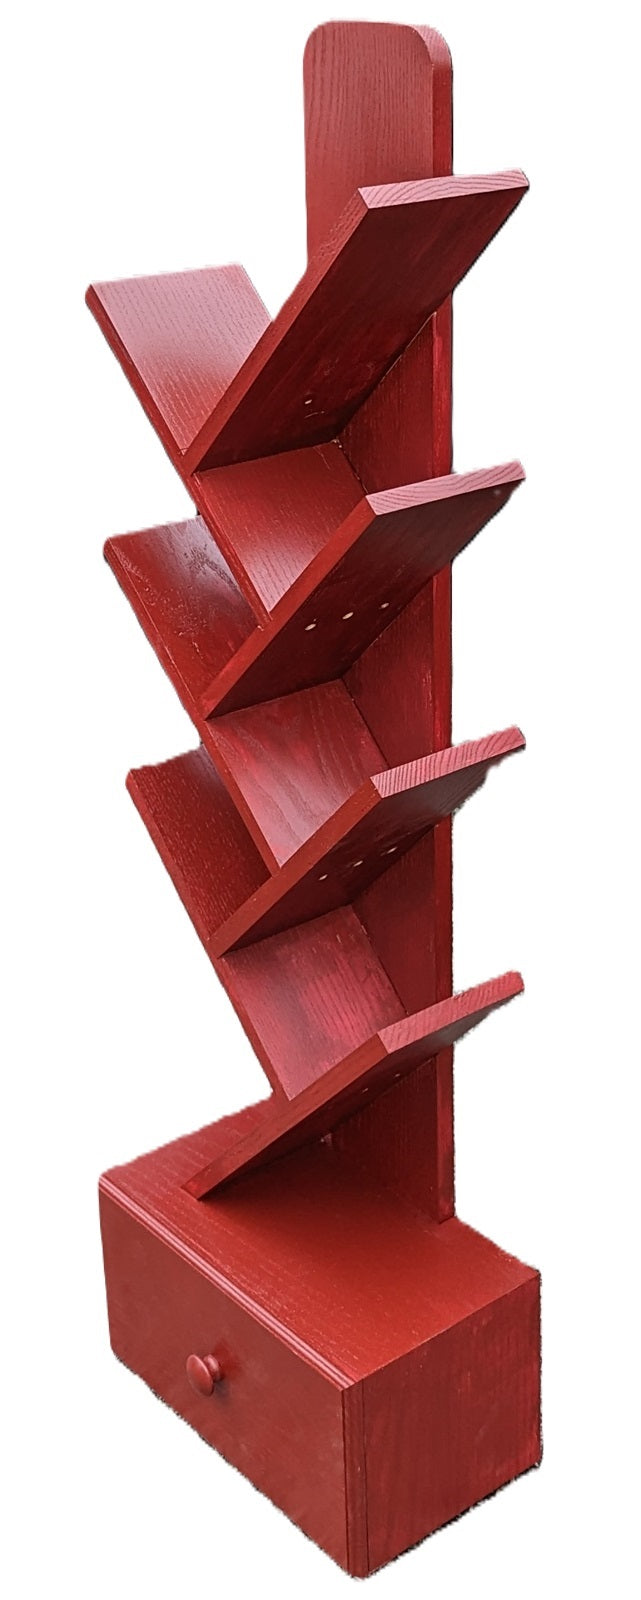 Bookshelf made from red oak with drawer "made to order". Choose size and color.